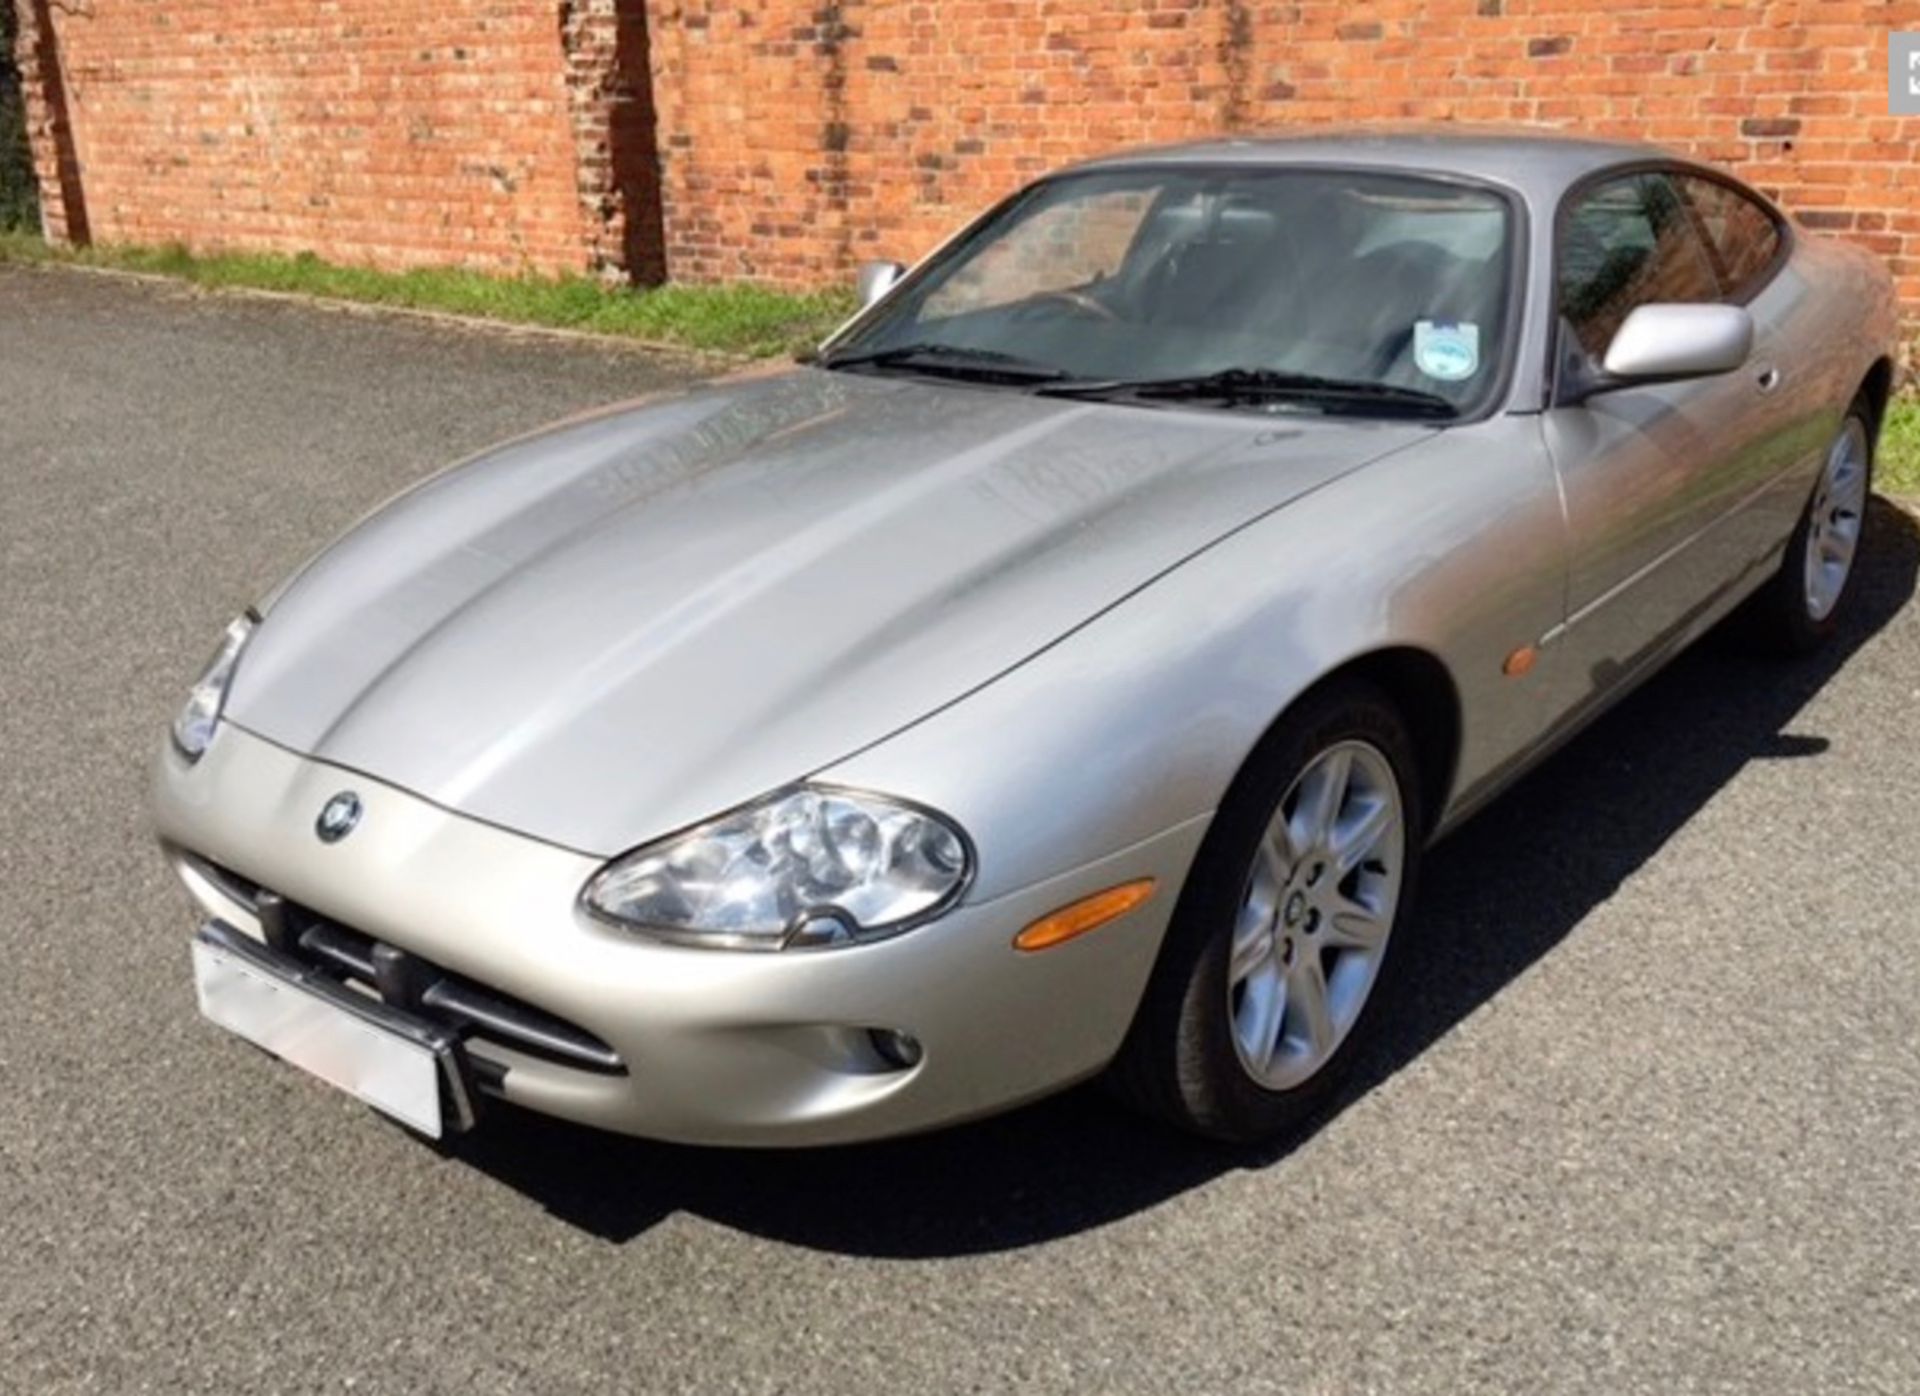 1998 Jaguar XK8 4.0 Coupe, Automatic, ***Reserve reduced, 13:40 on 11/4/17*** - Image 11 of 15